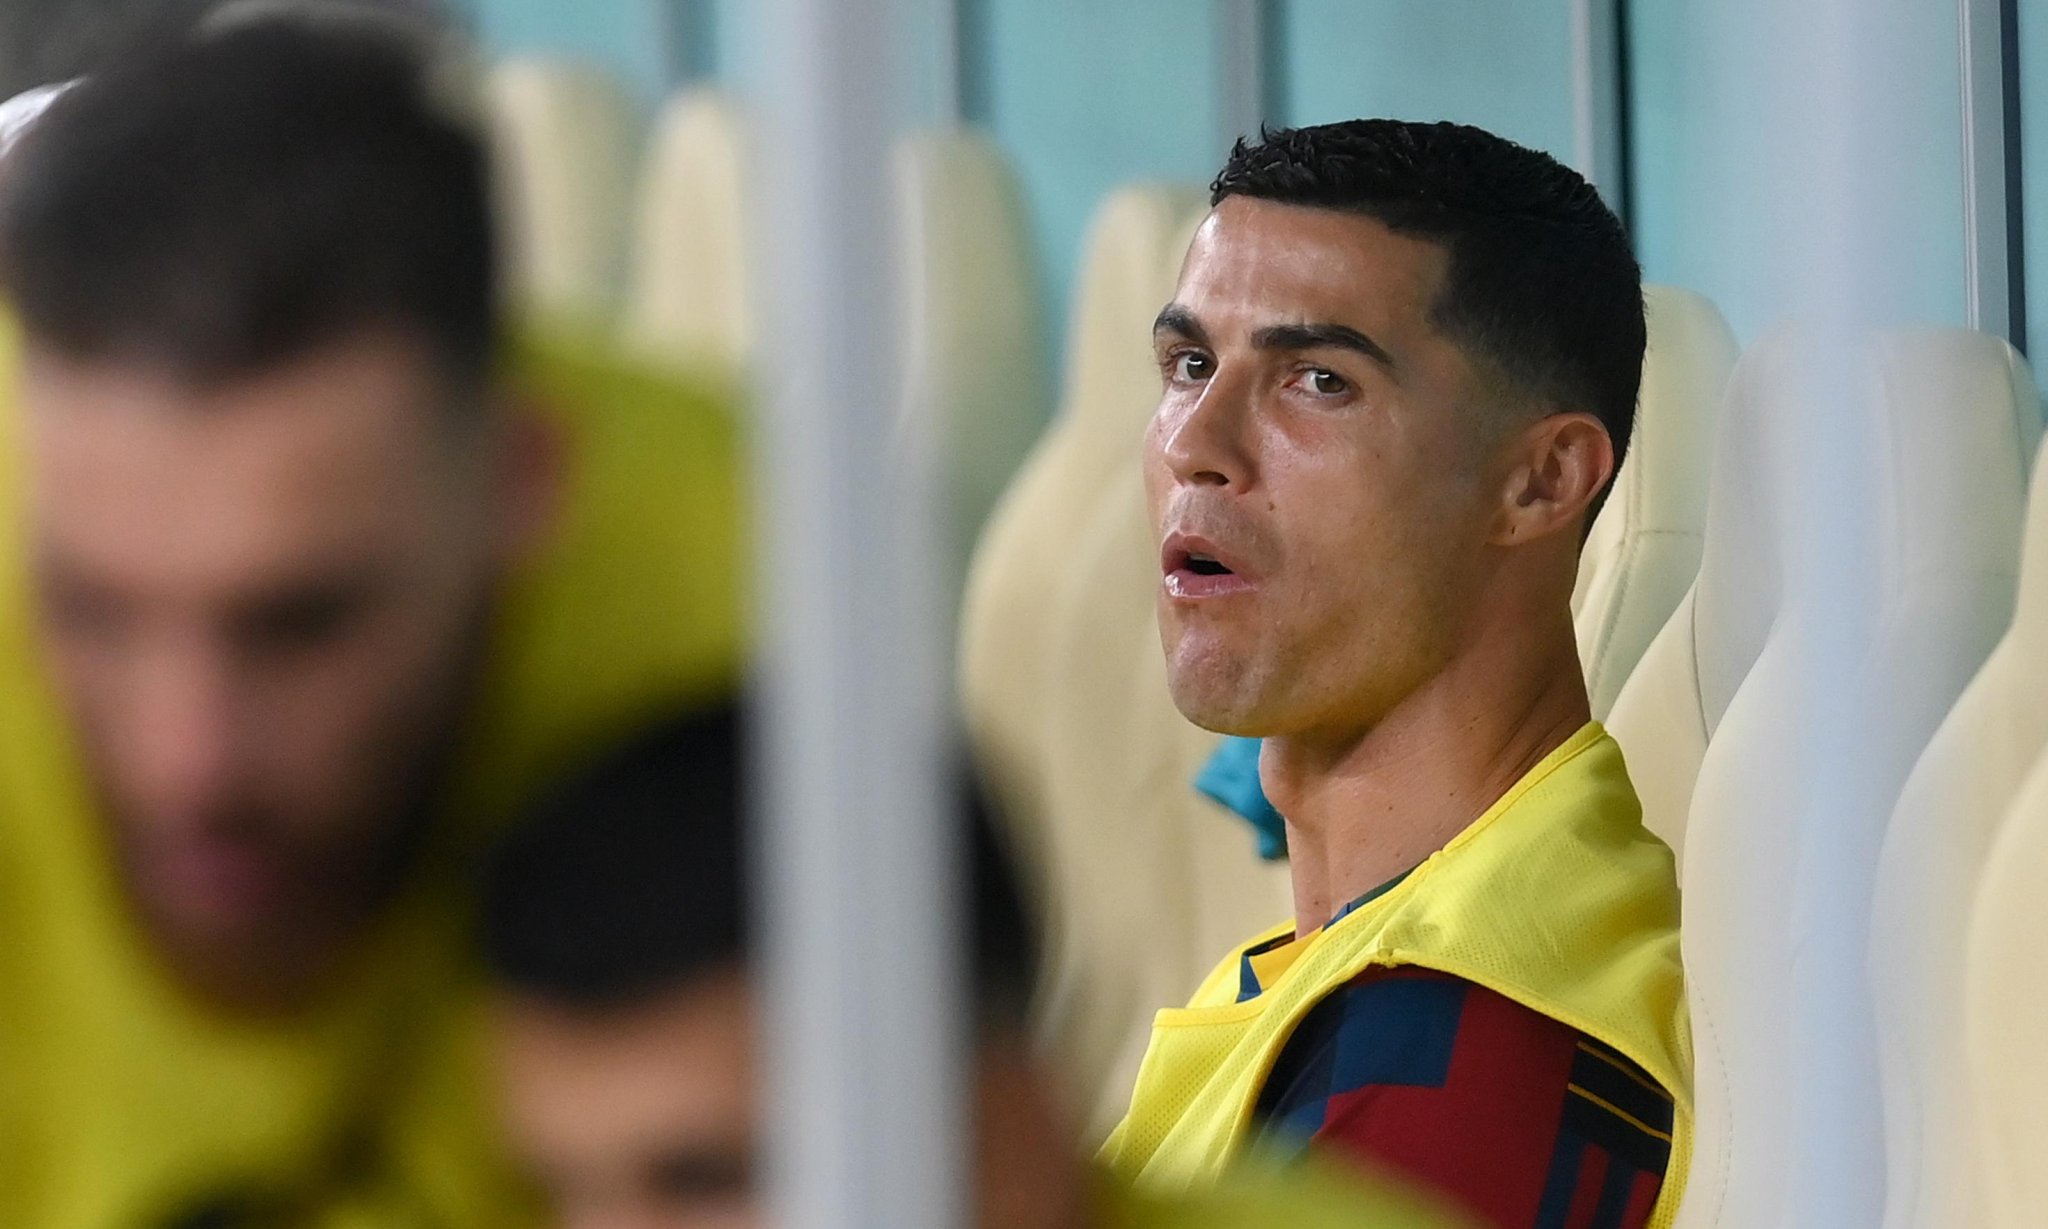 Portugal deny reports that Cristiano Ronaldo threatened to leave World Cup